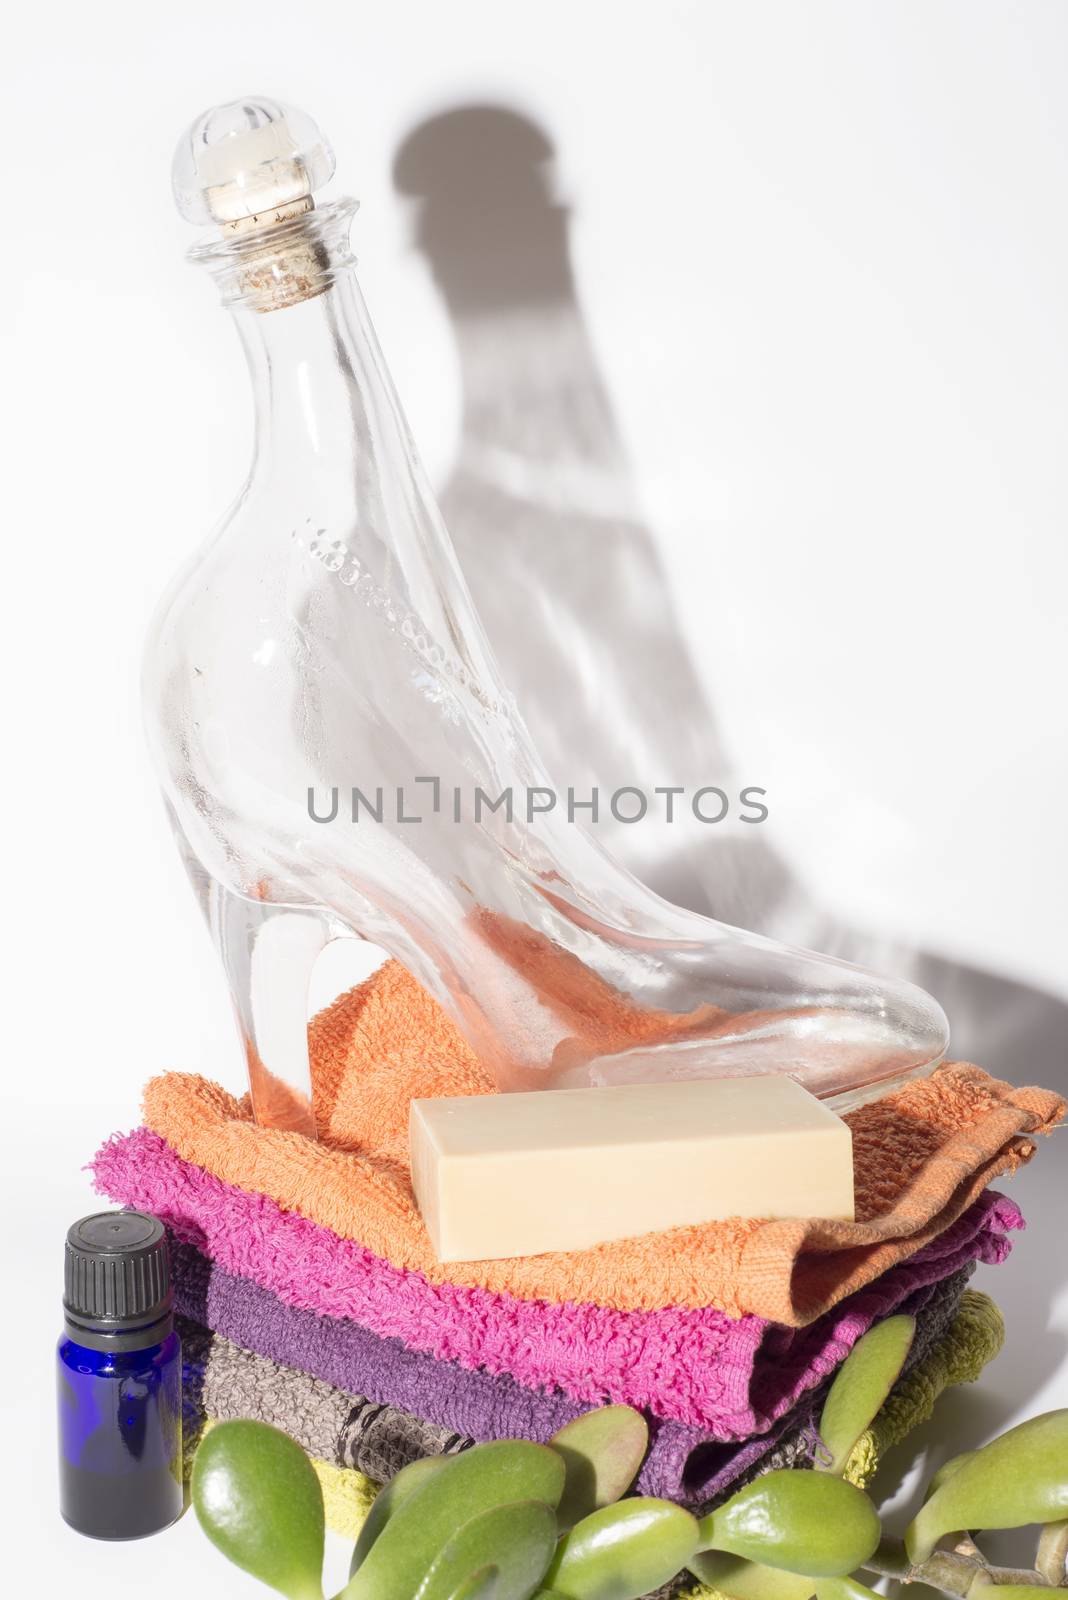 glass shoe plant and soap on top of facecloths by morrbyte